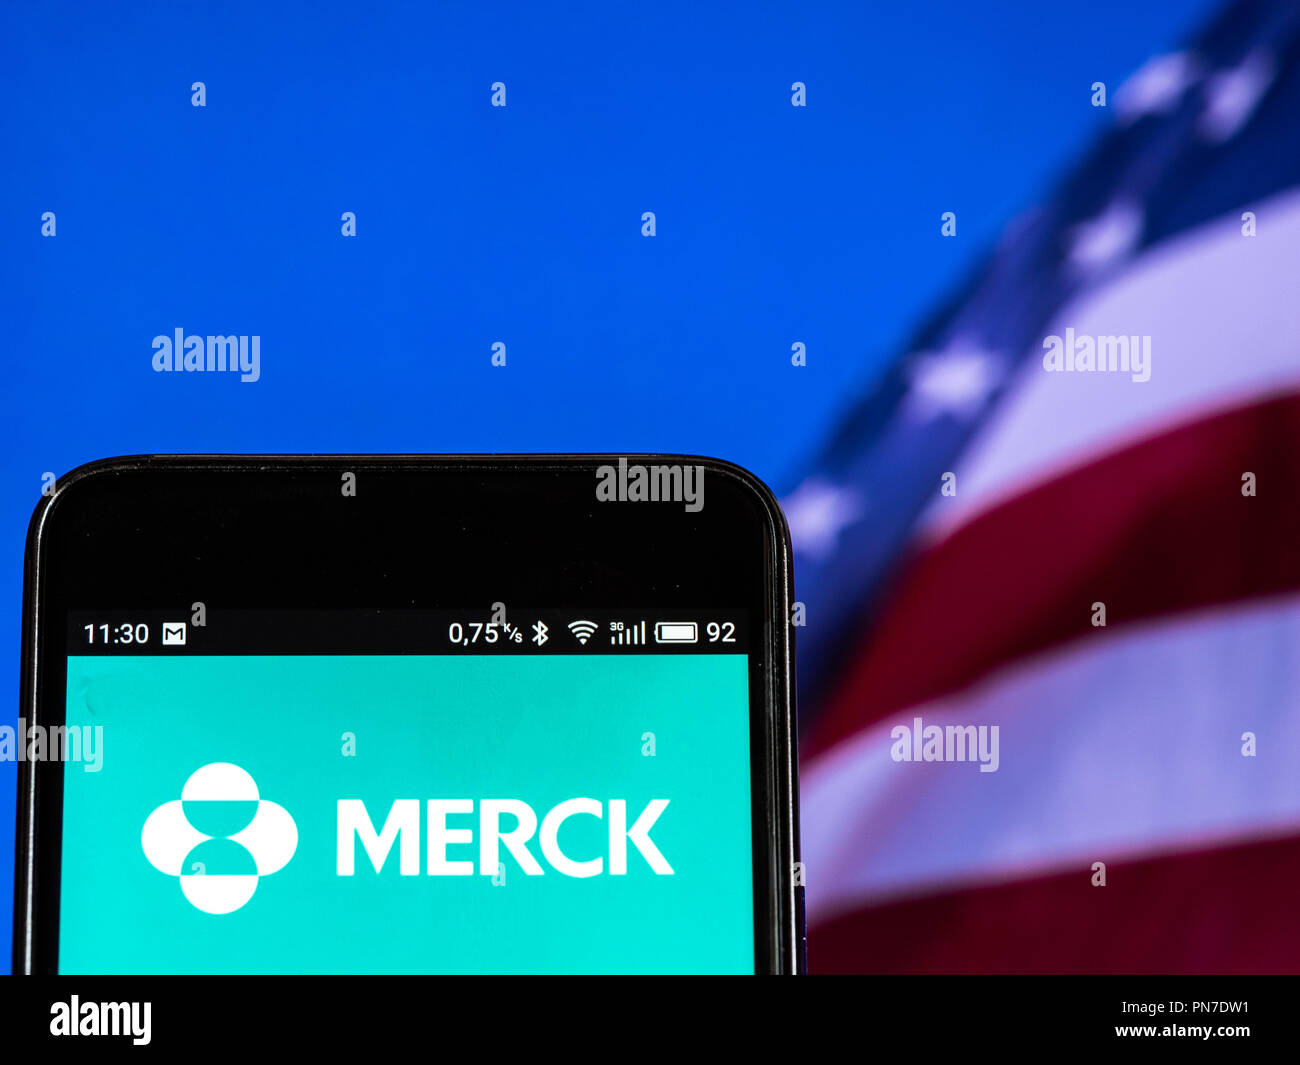 Merck & Co. logo seen displayed on smart phone. Merck & Company, Inc., d.b.a. Merck Sharp & Dohme (MSD) outside the United States and Canada, is an American pharmaceutical company and one of the largest pharmaceutical companies in the world. Stock Photo